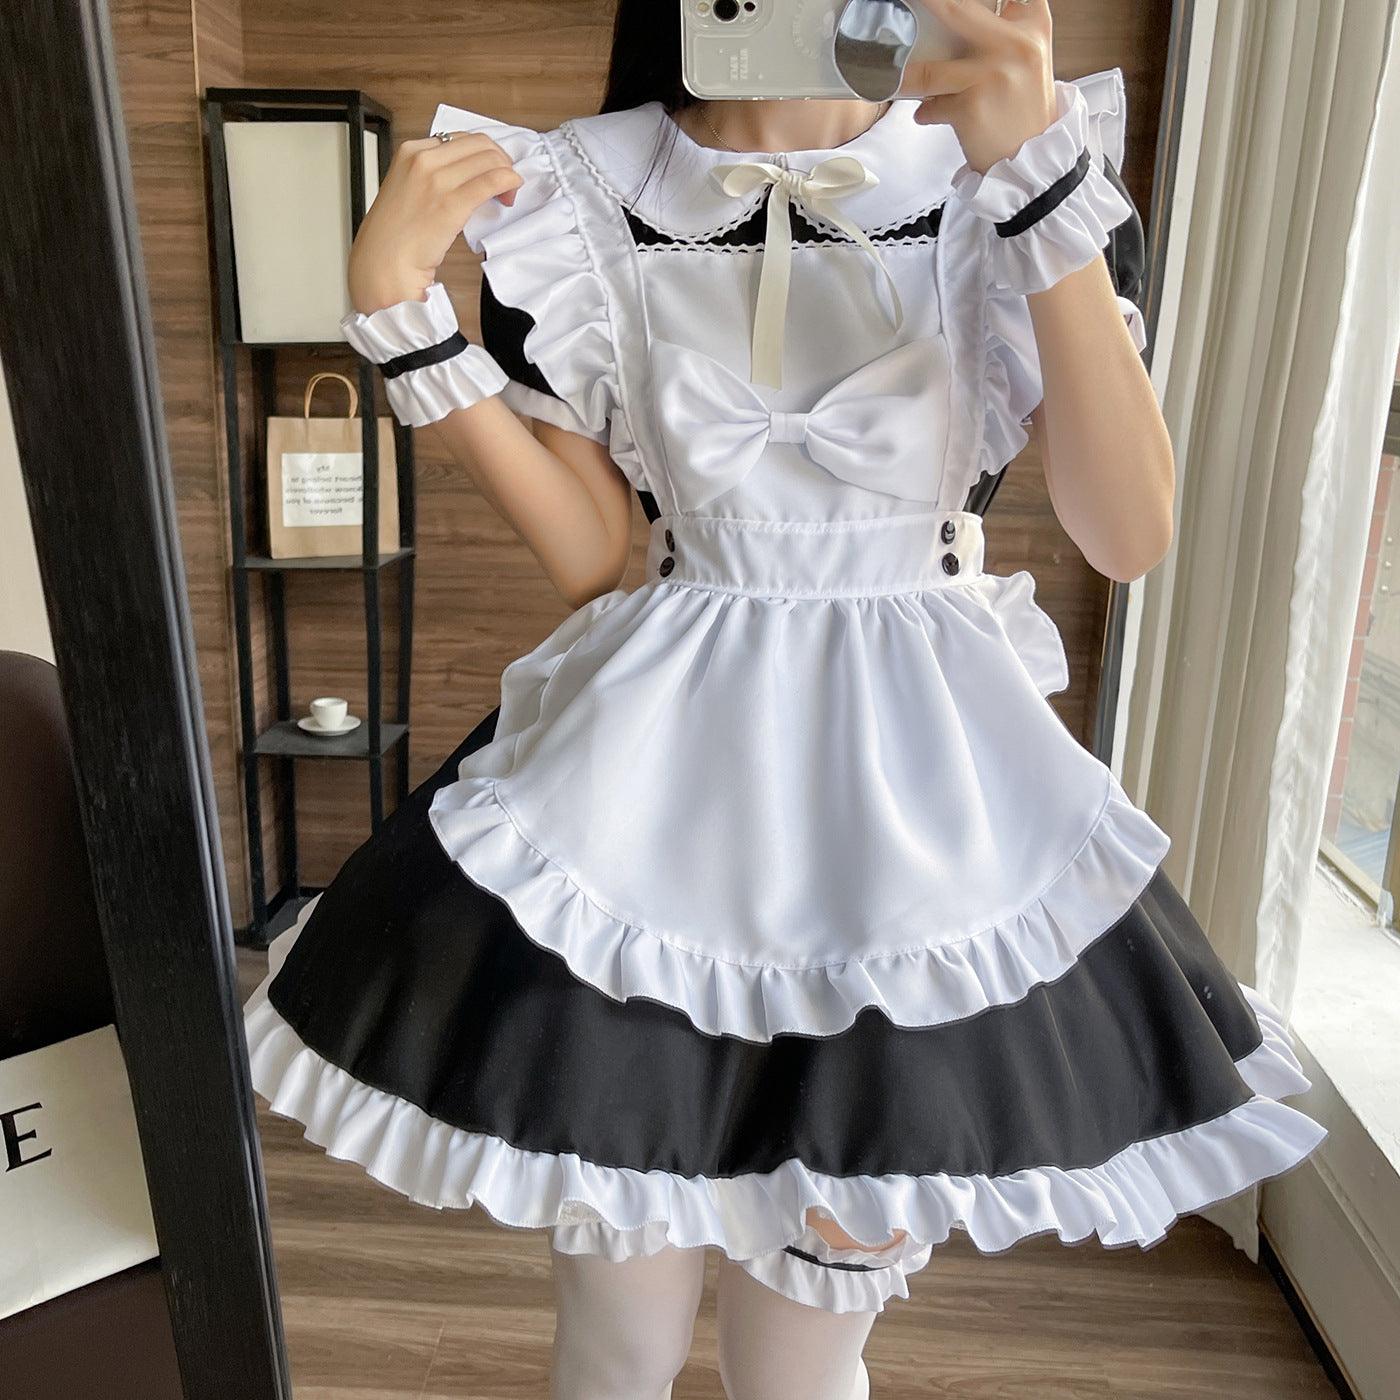 Black White Large Size Maid Outfit Lolita Bow Dress Crossdresser Fancy Cosplay Costume